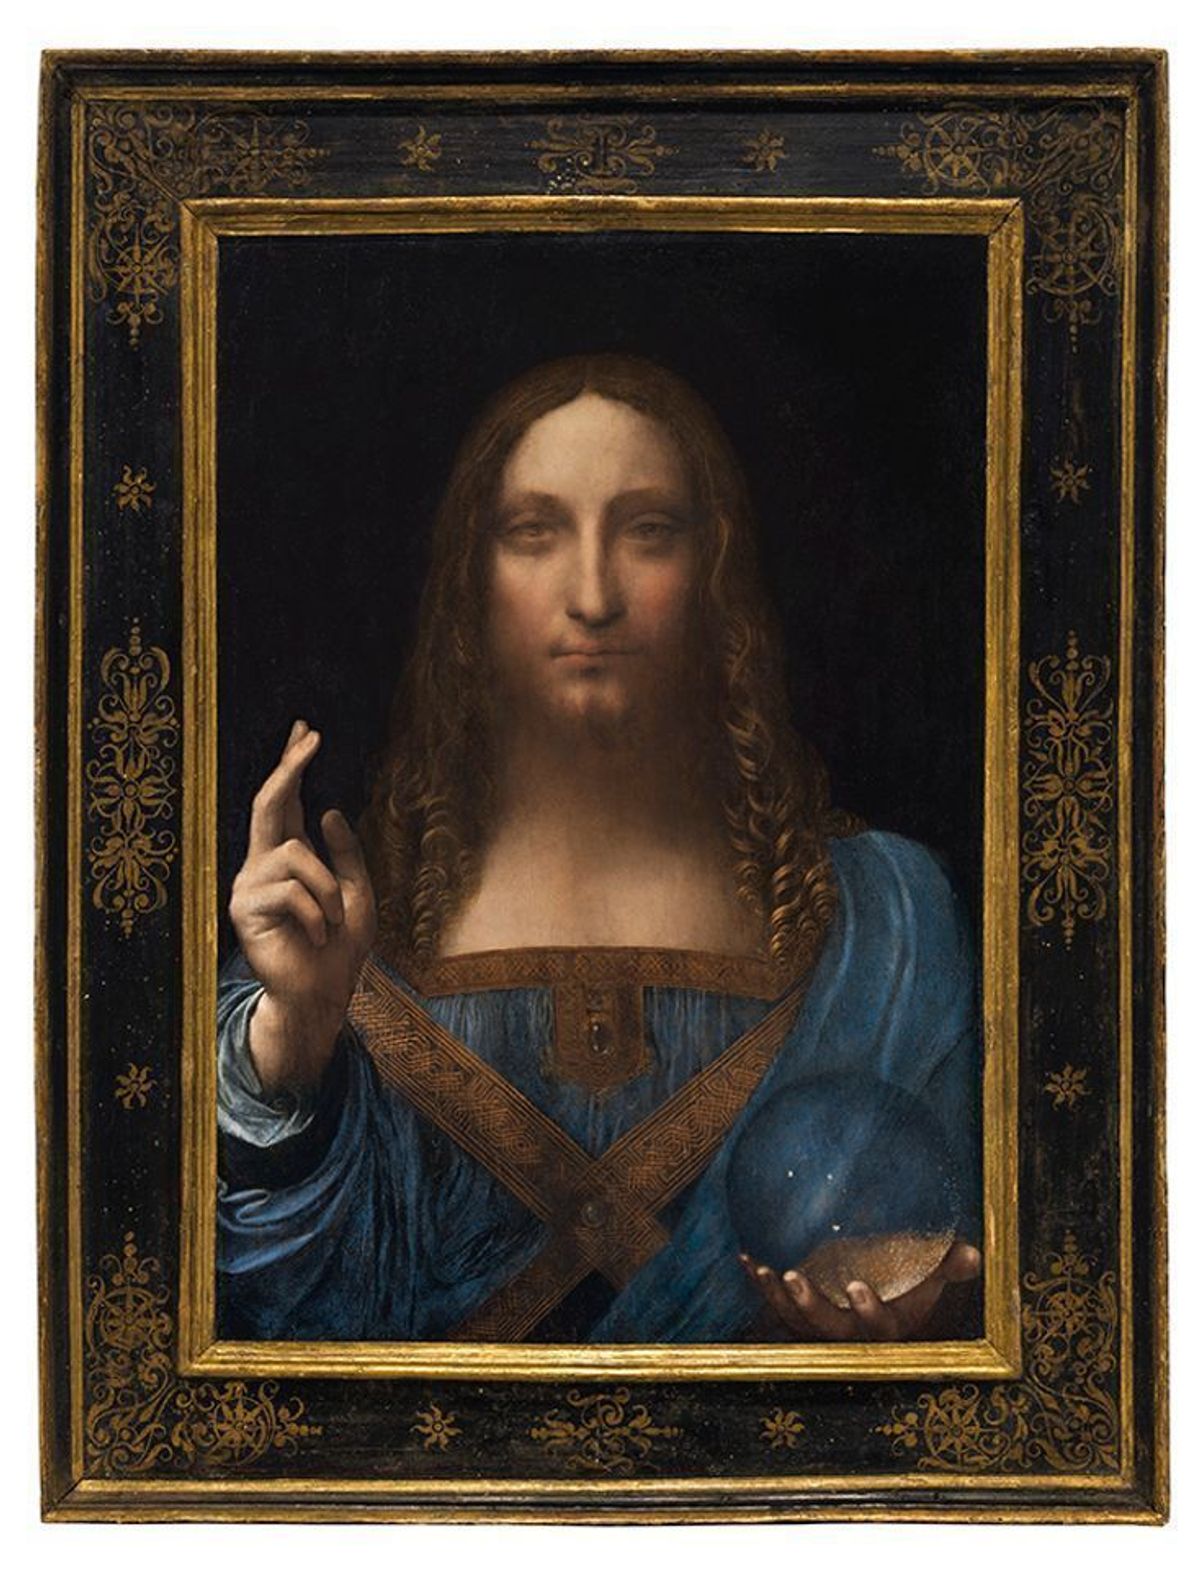 Salvator Mundi attracted world-wide headlines after selling at auction for $450m 